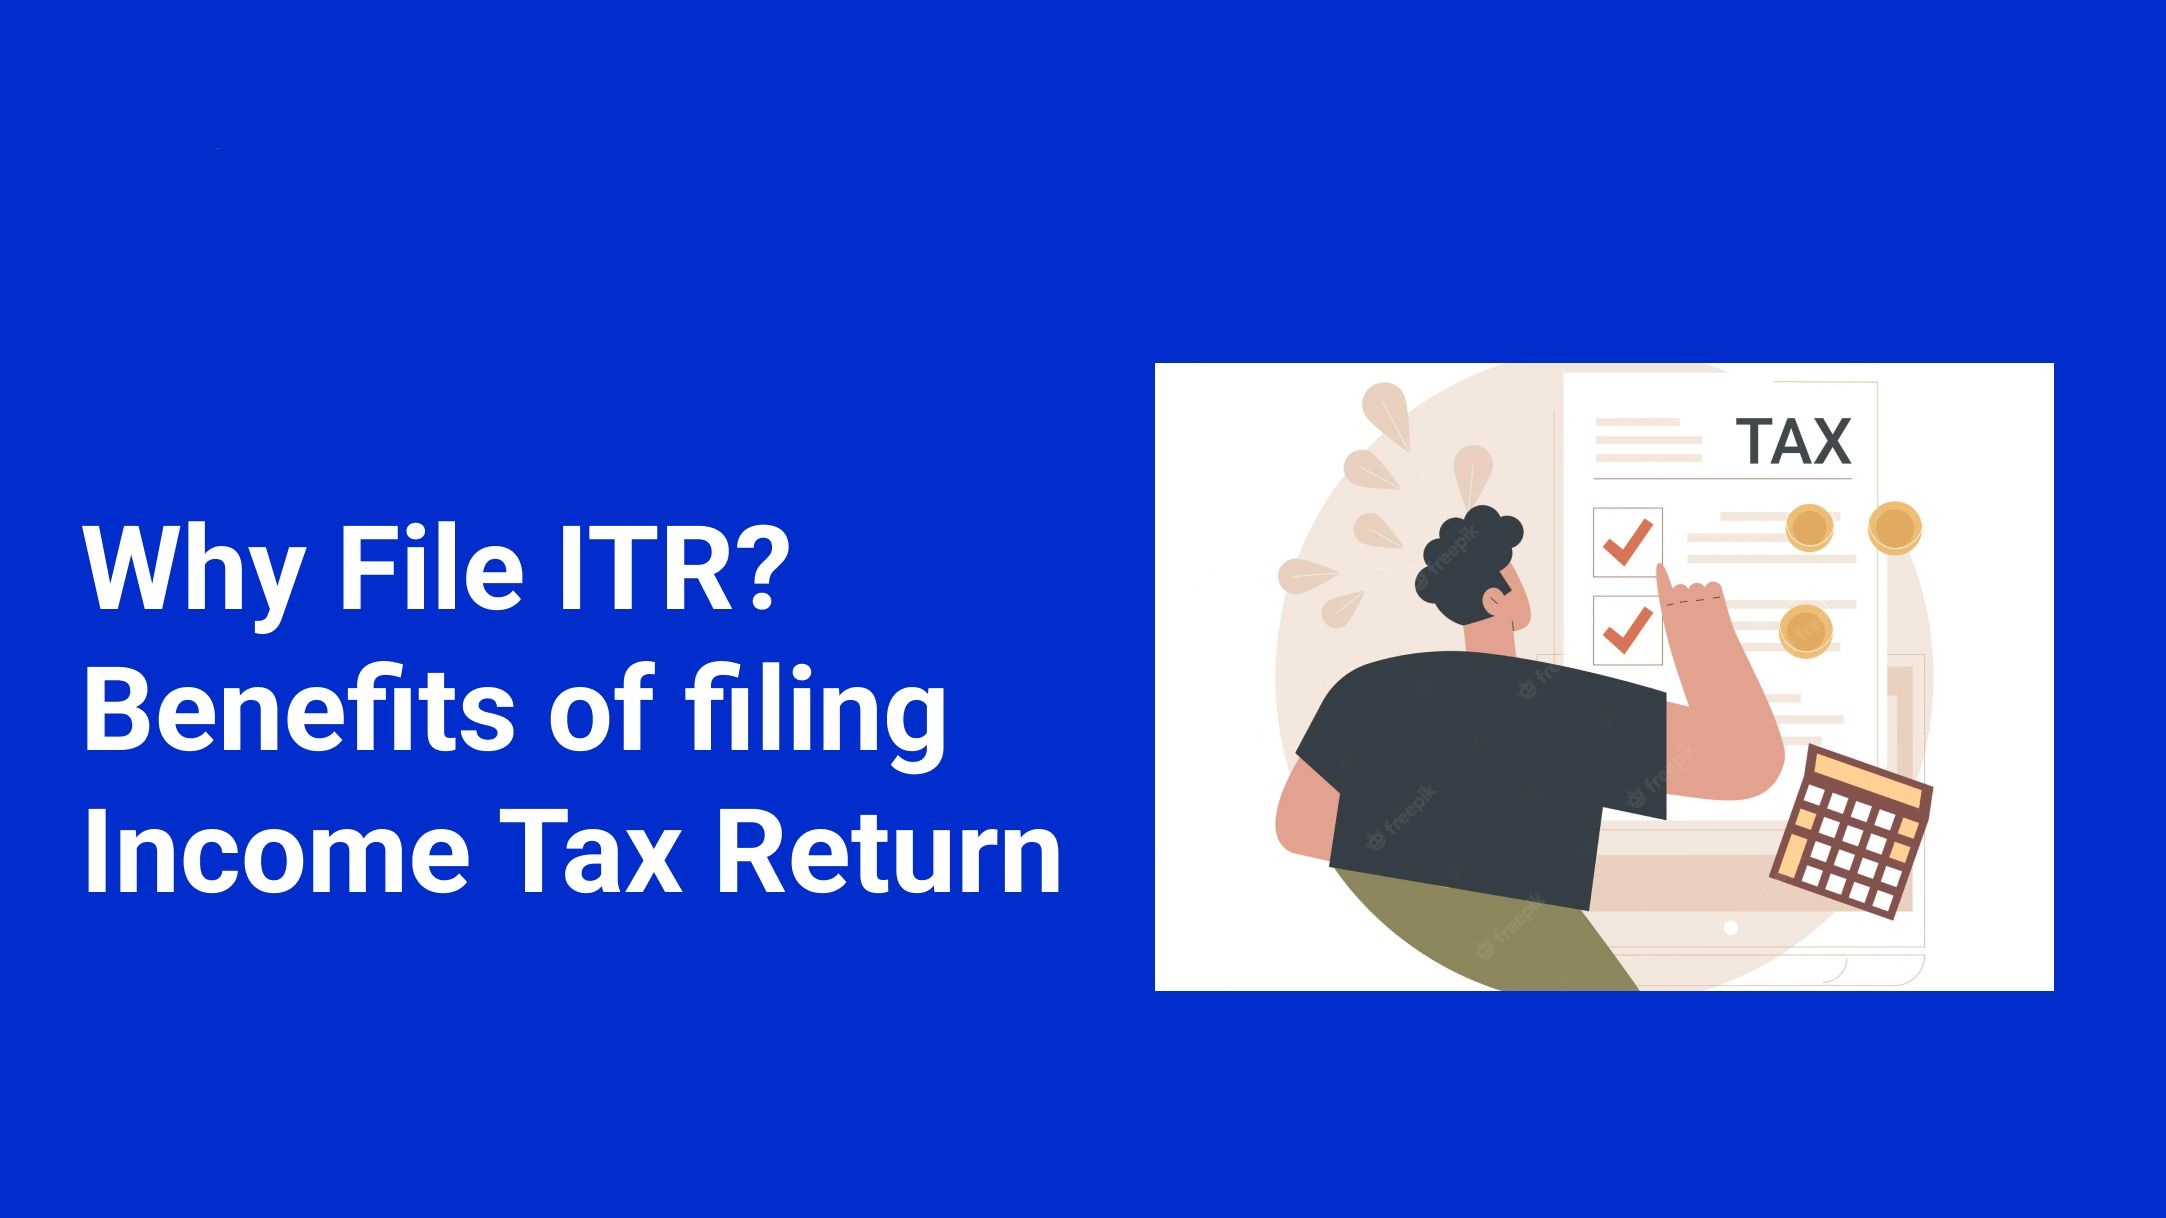 Why File Income Tax Returns? Benefits of Filing Income Tax Returns